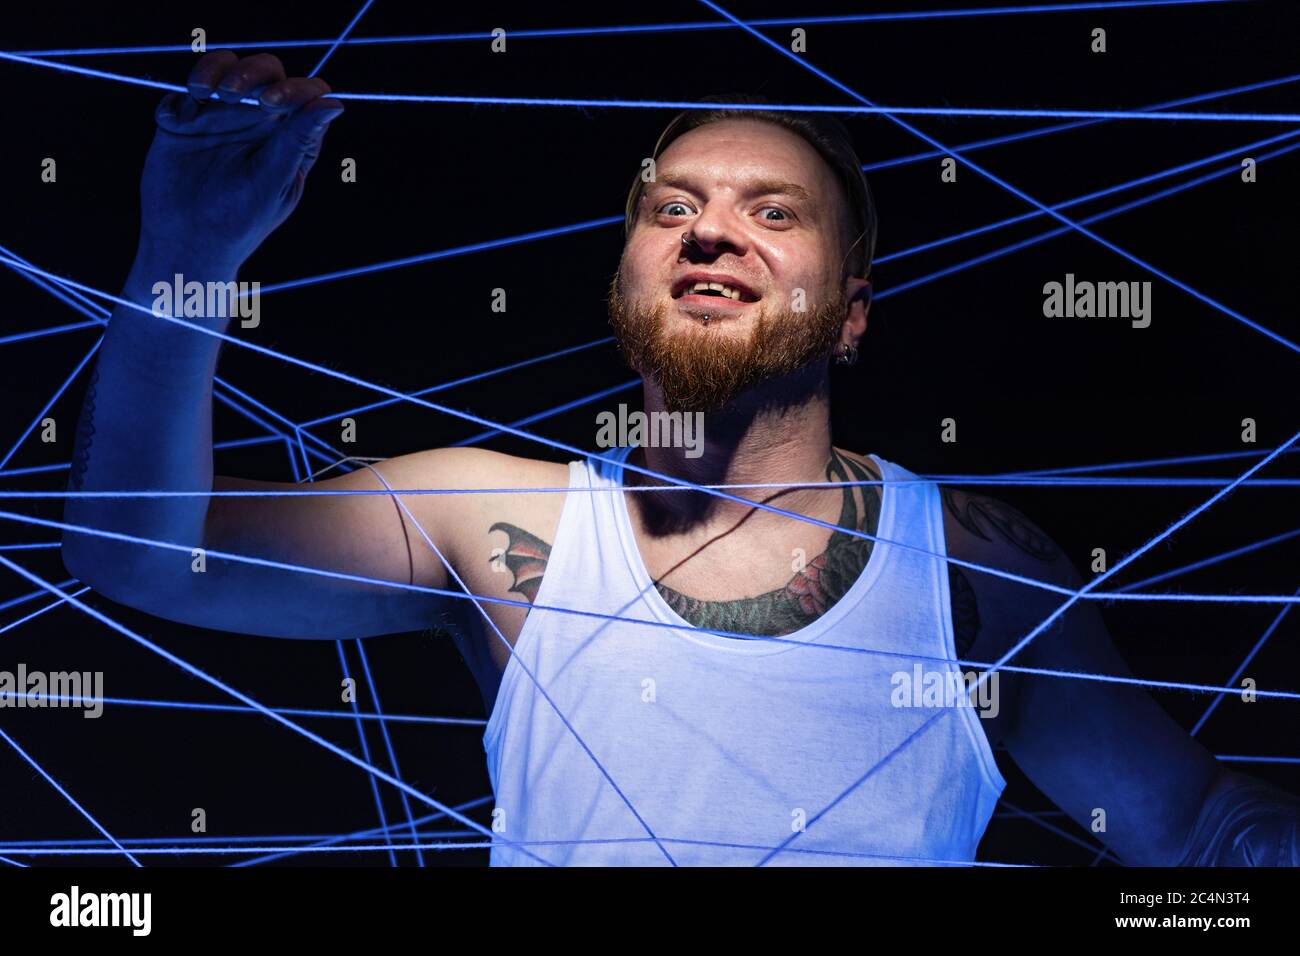 Crazy man tangled in threads in neon light Stock Photo